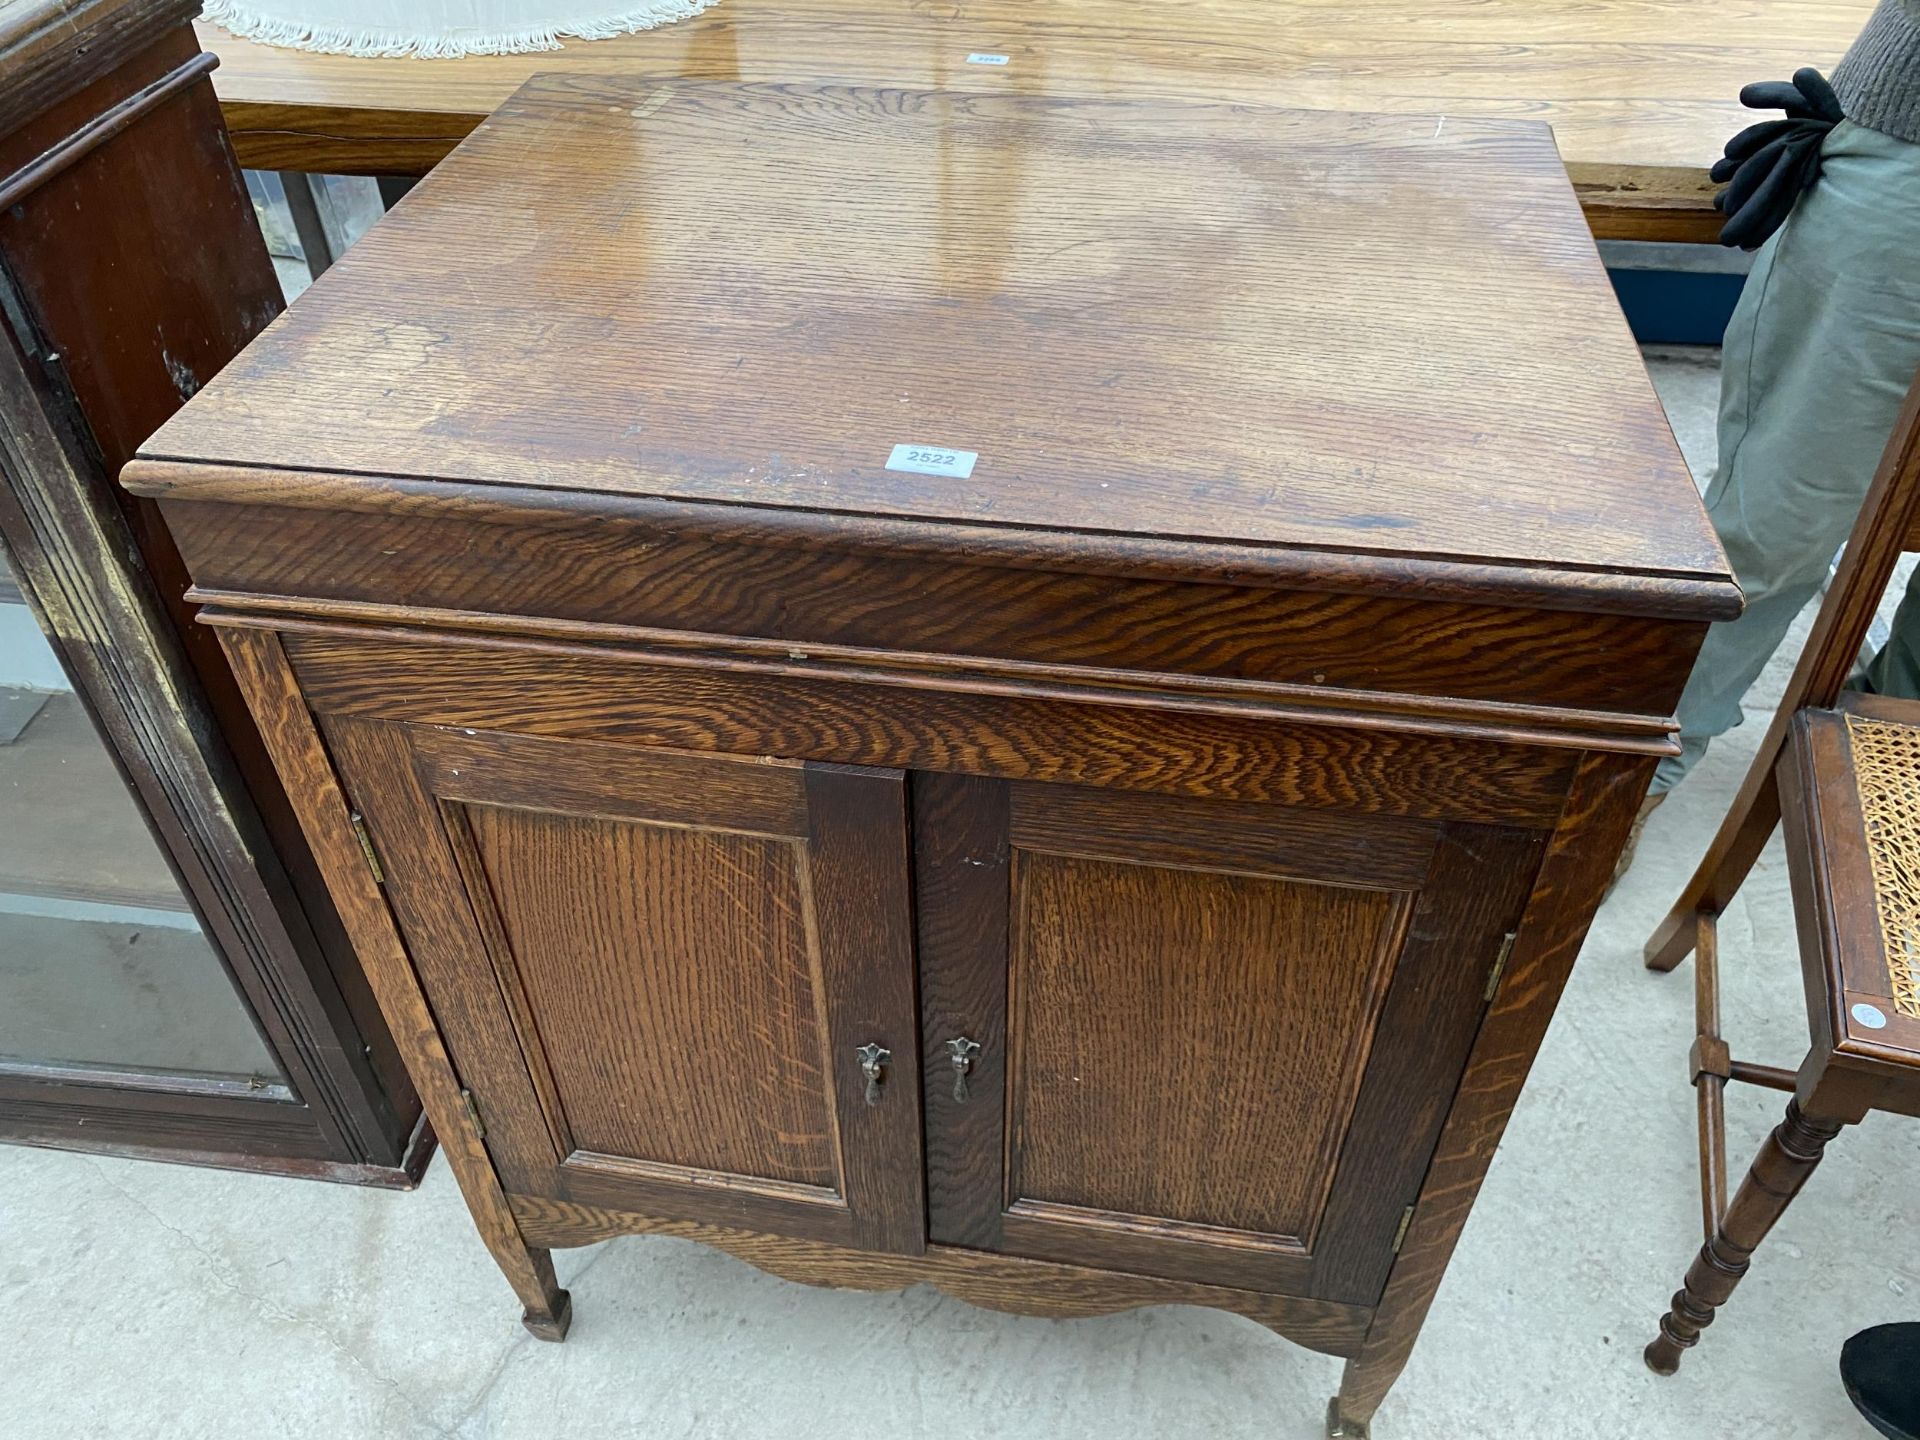 AN EARLY 20TH CENTURY OAK GRAMOPHONE CABINET LACKING WINDER AND WORKS